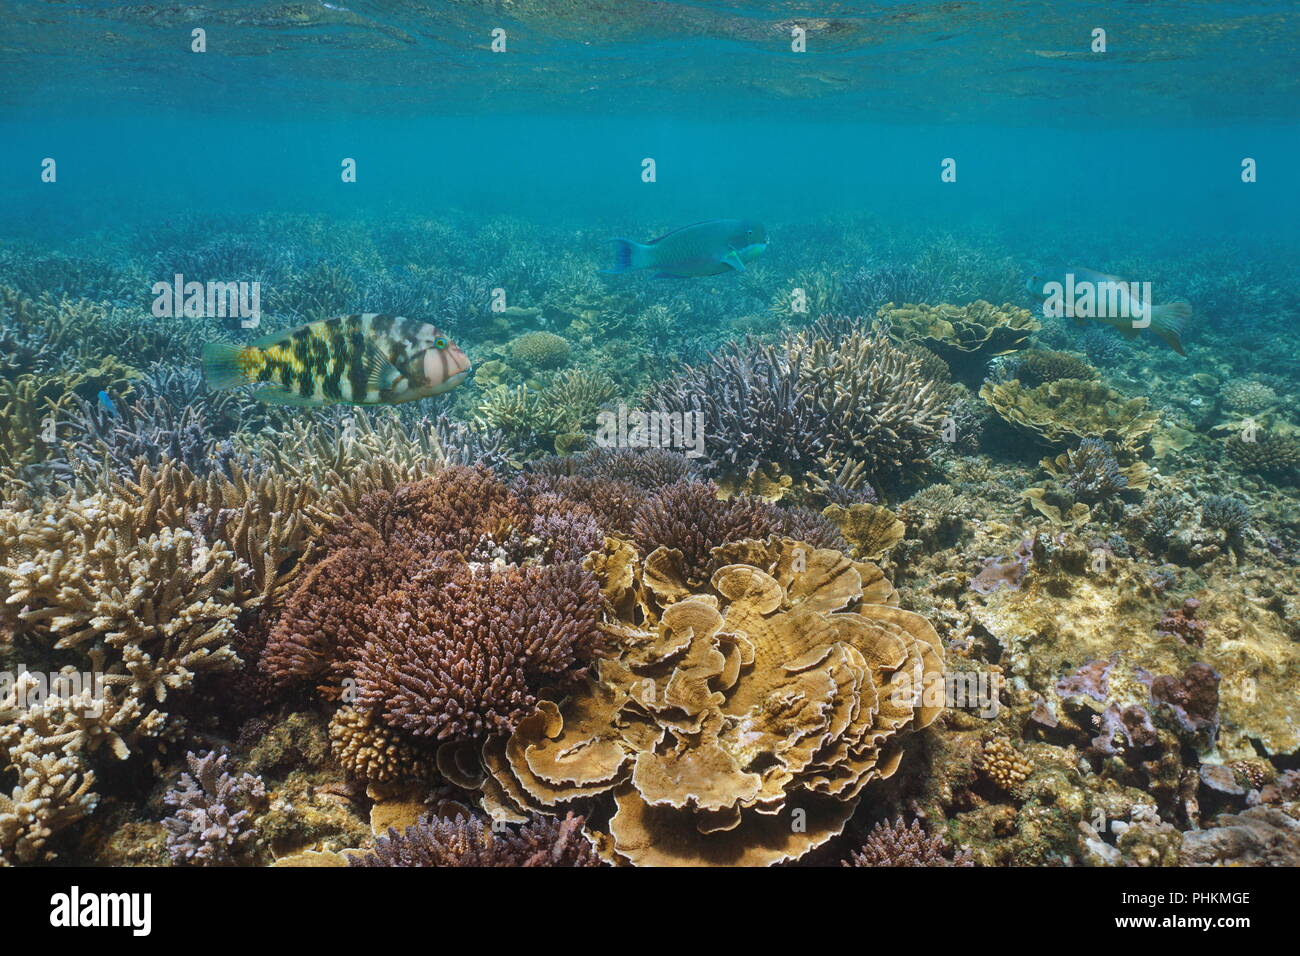 Underwater coral reef with tropical fish, Pacific ocean, New Caledonia, Oceania Stock Photo